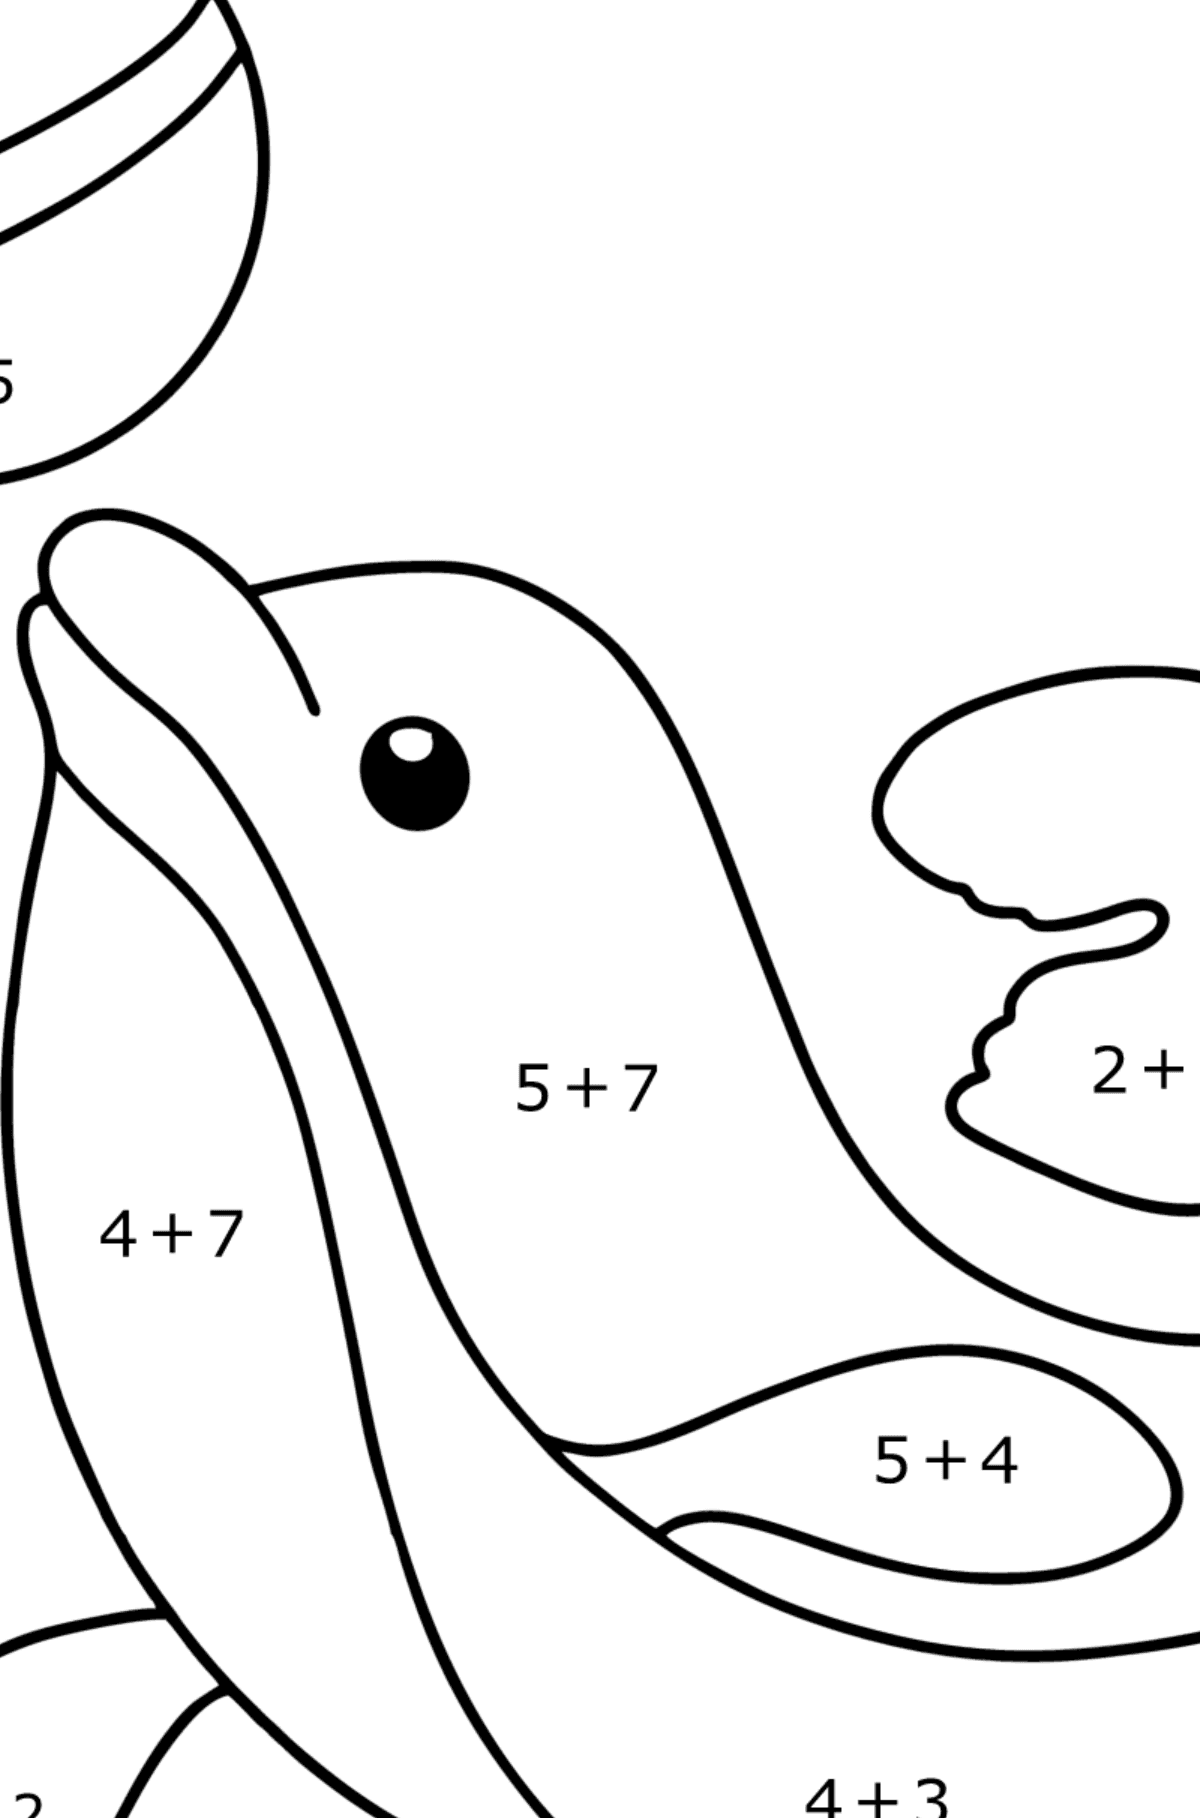 Dolphin is Performing coloring page - Math Coloring - Addition for Kids